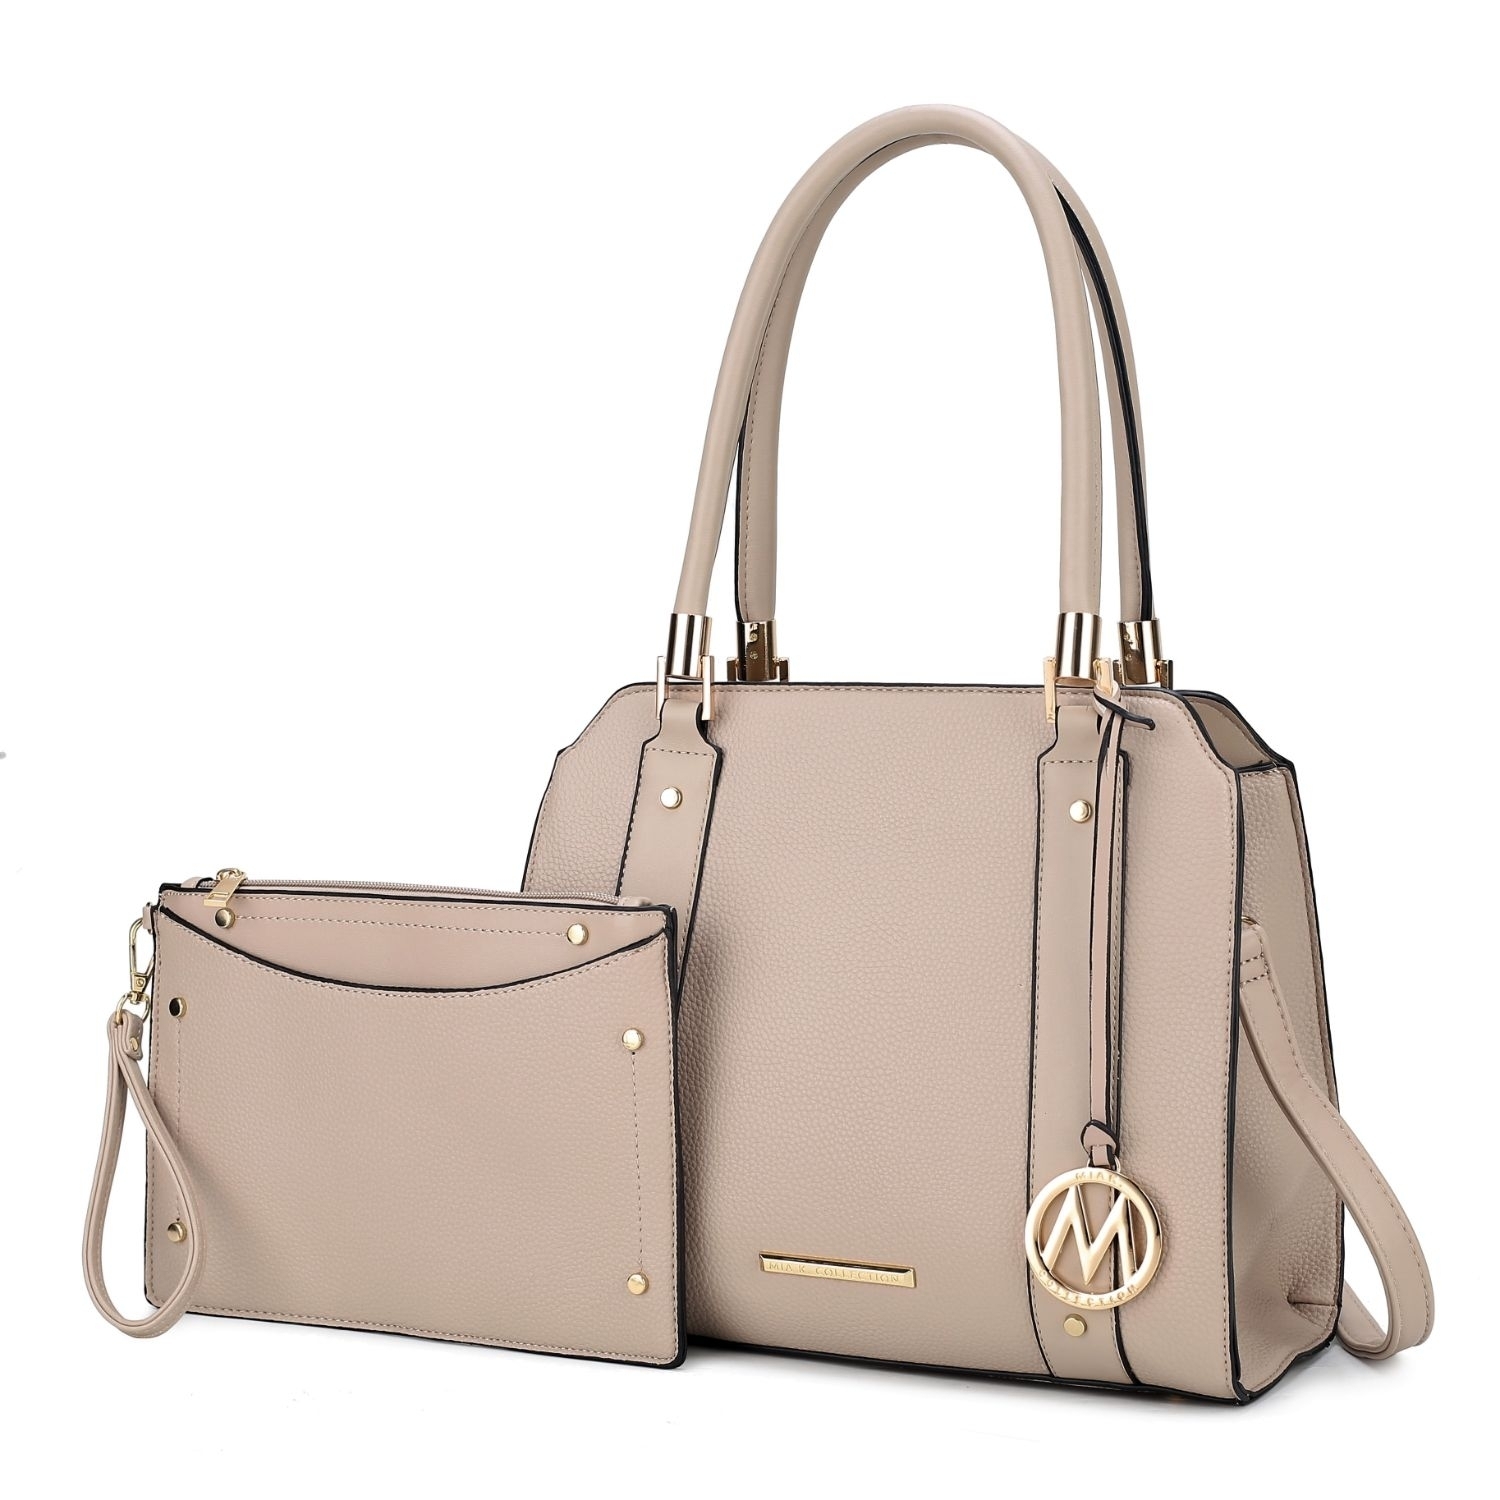 MKF Collection Norah Vegan Leather Women's Satchel Bag With Wristlet -2 Pieces By Mia K - Taupe